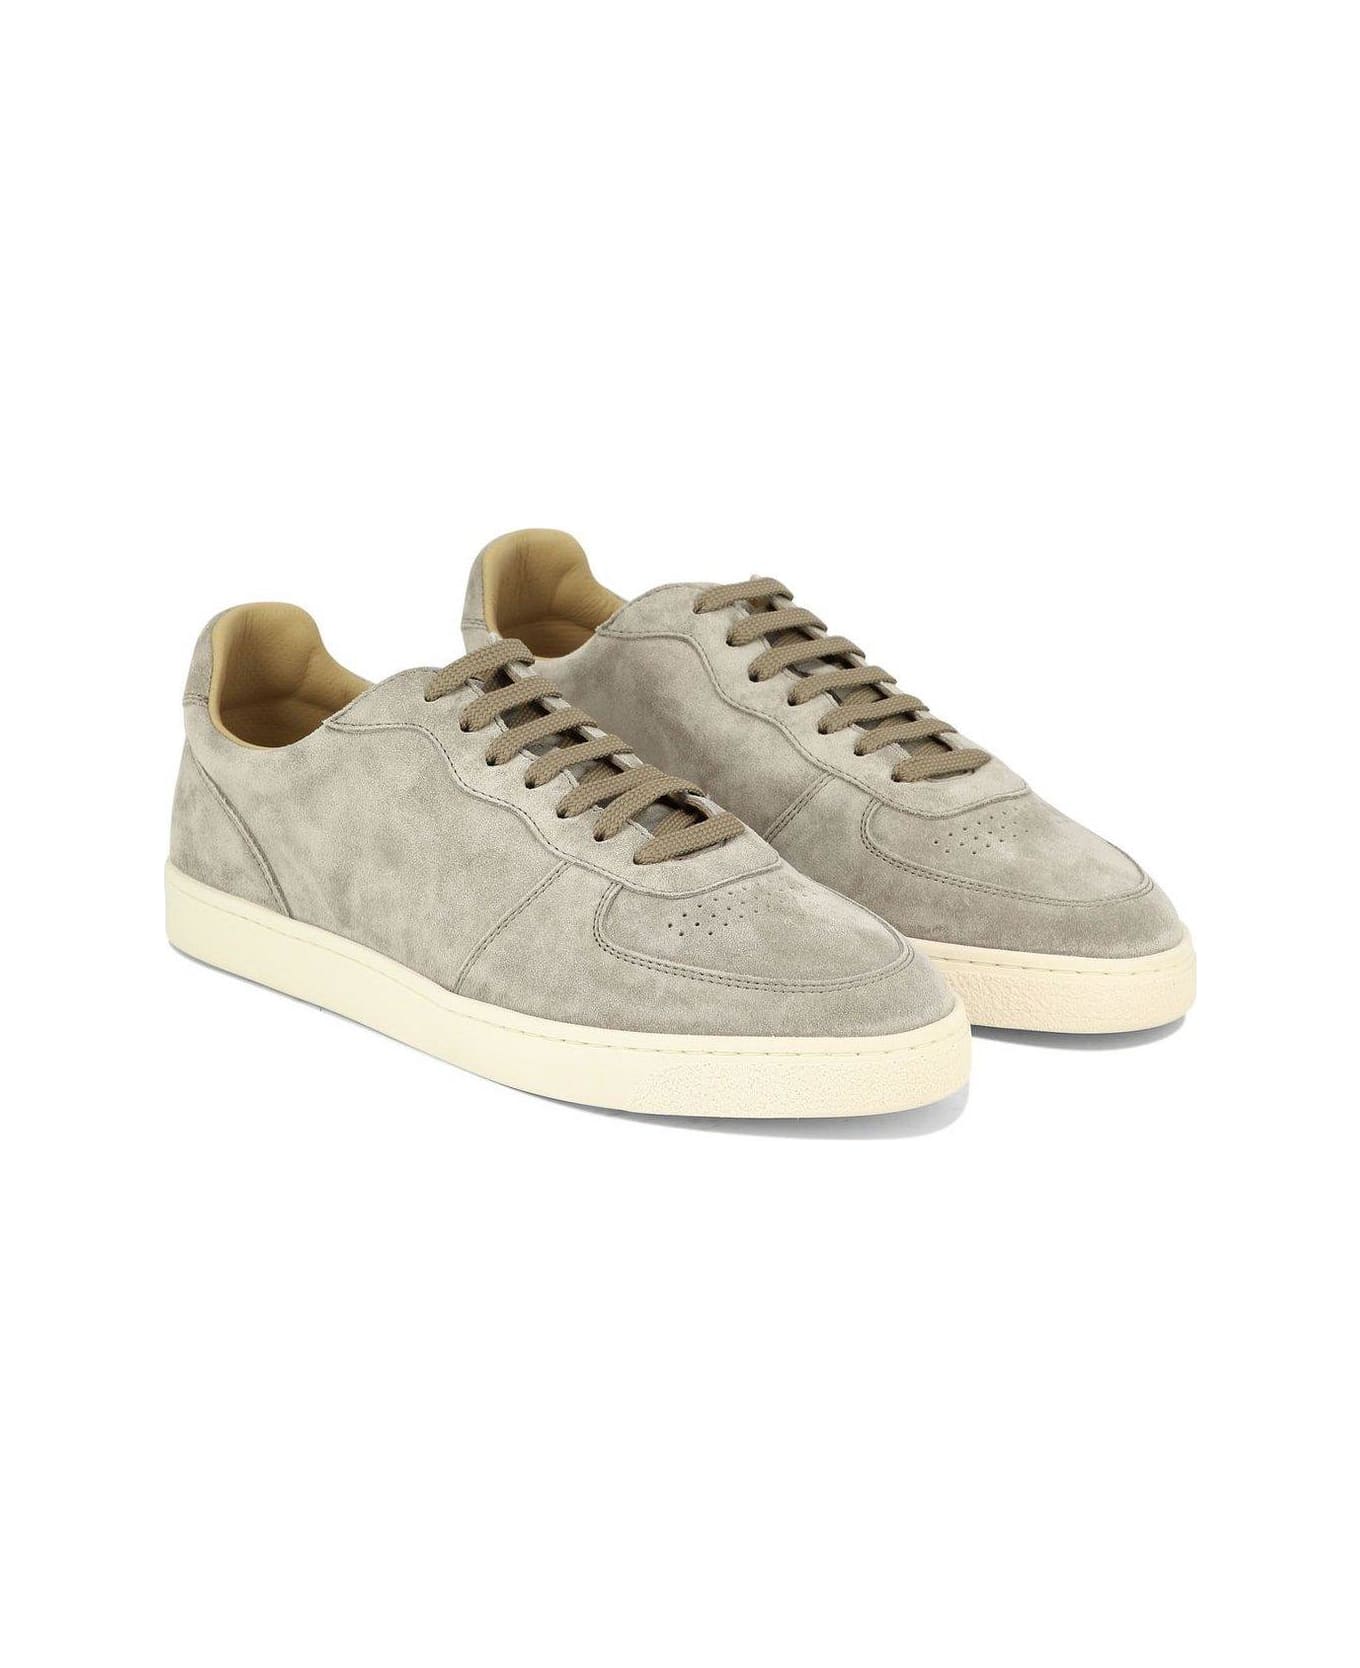 Brunello Cucinelli Round-toe Lace-up Sneakers